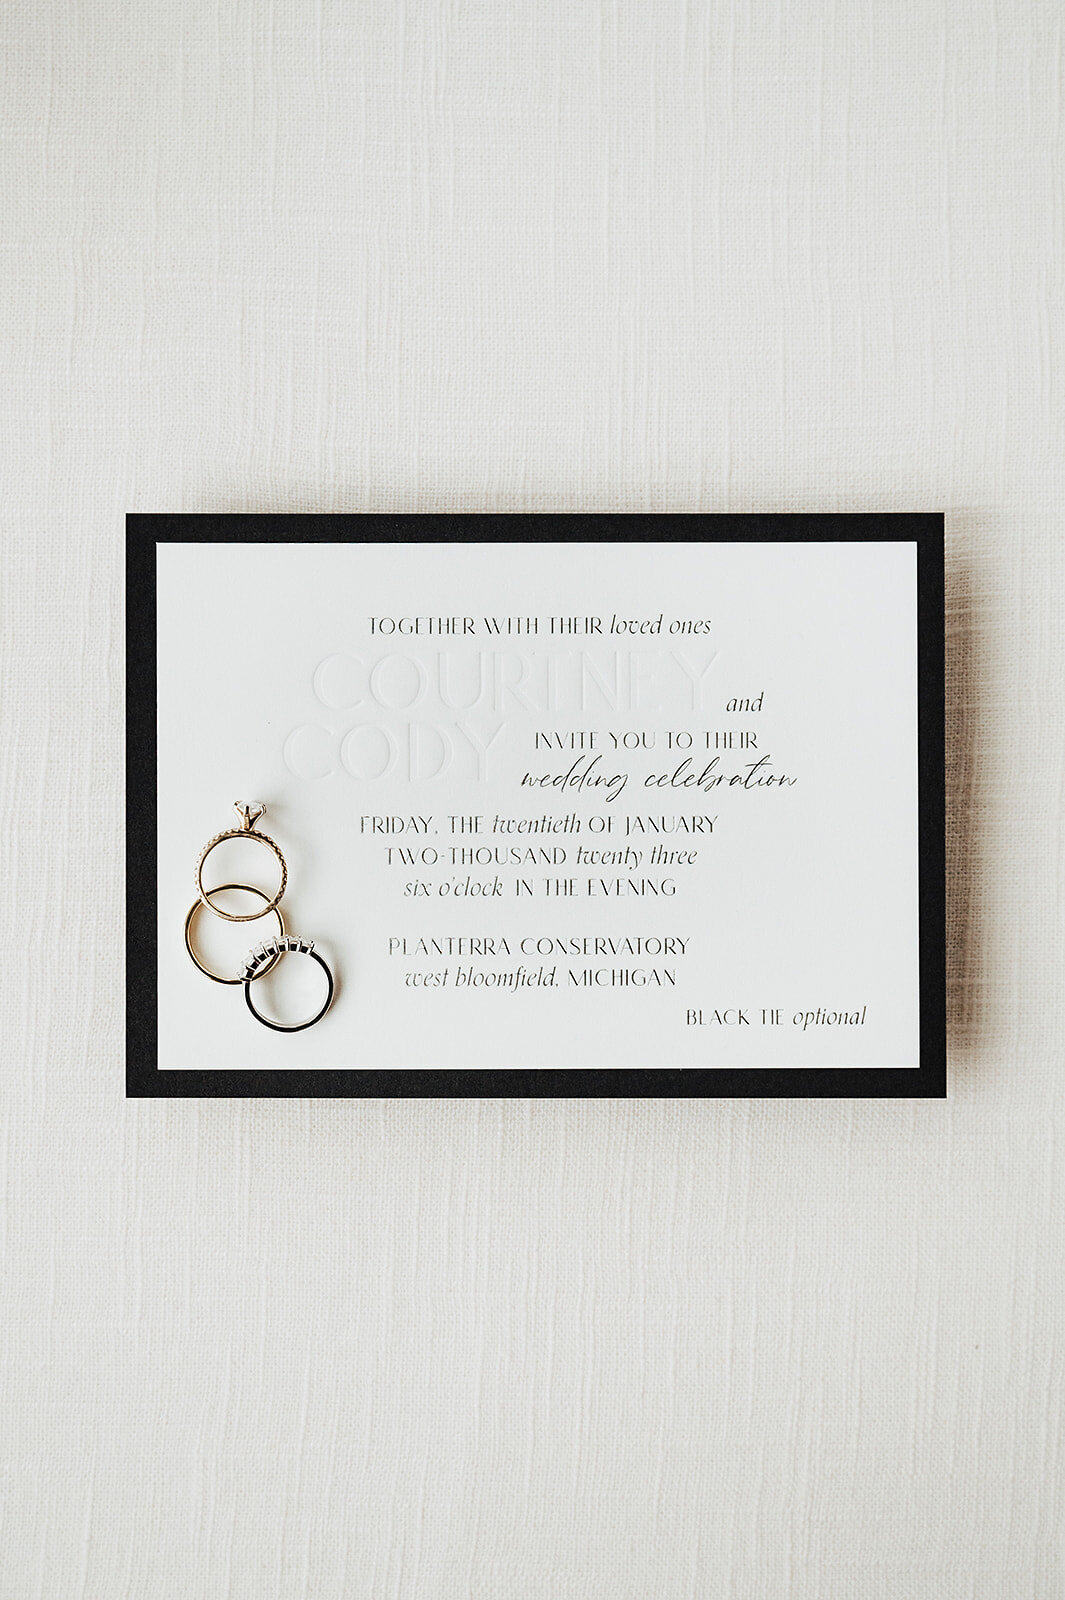 A black and white debossed custom wedding invitation with wedding rings on it against a white background from alyssa amez design's custom wedding stationery and signage